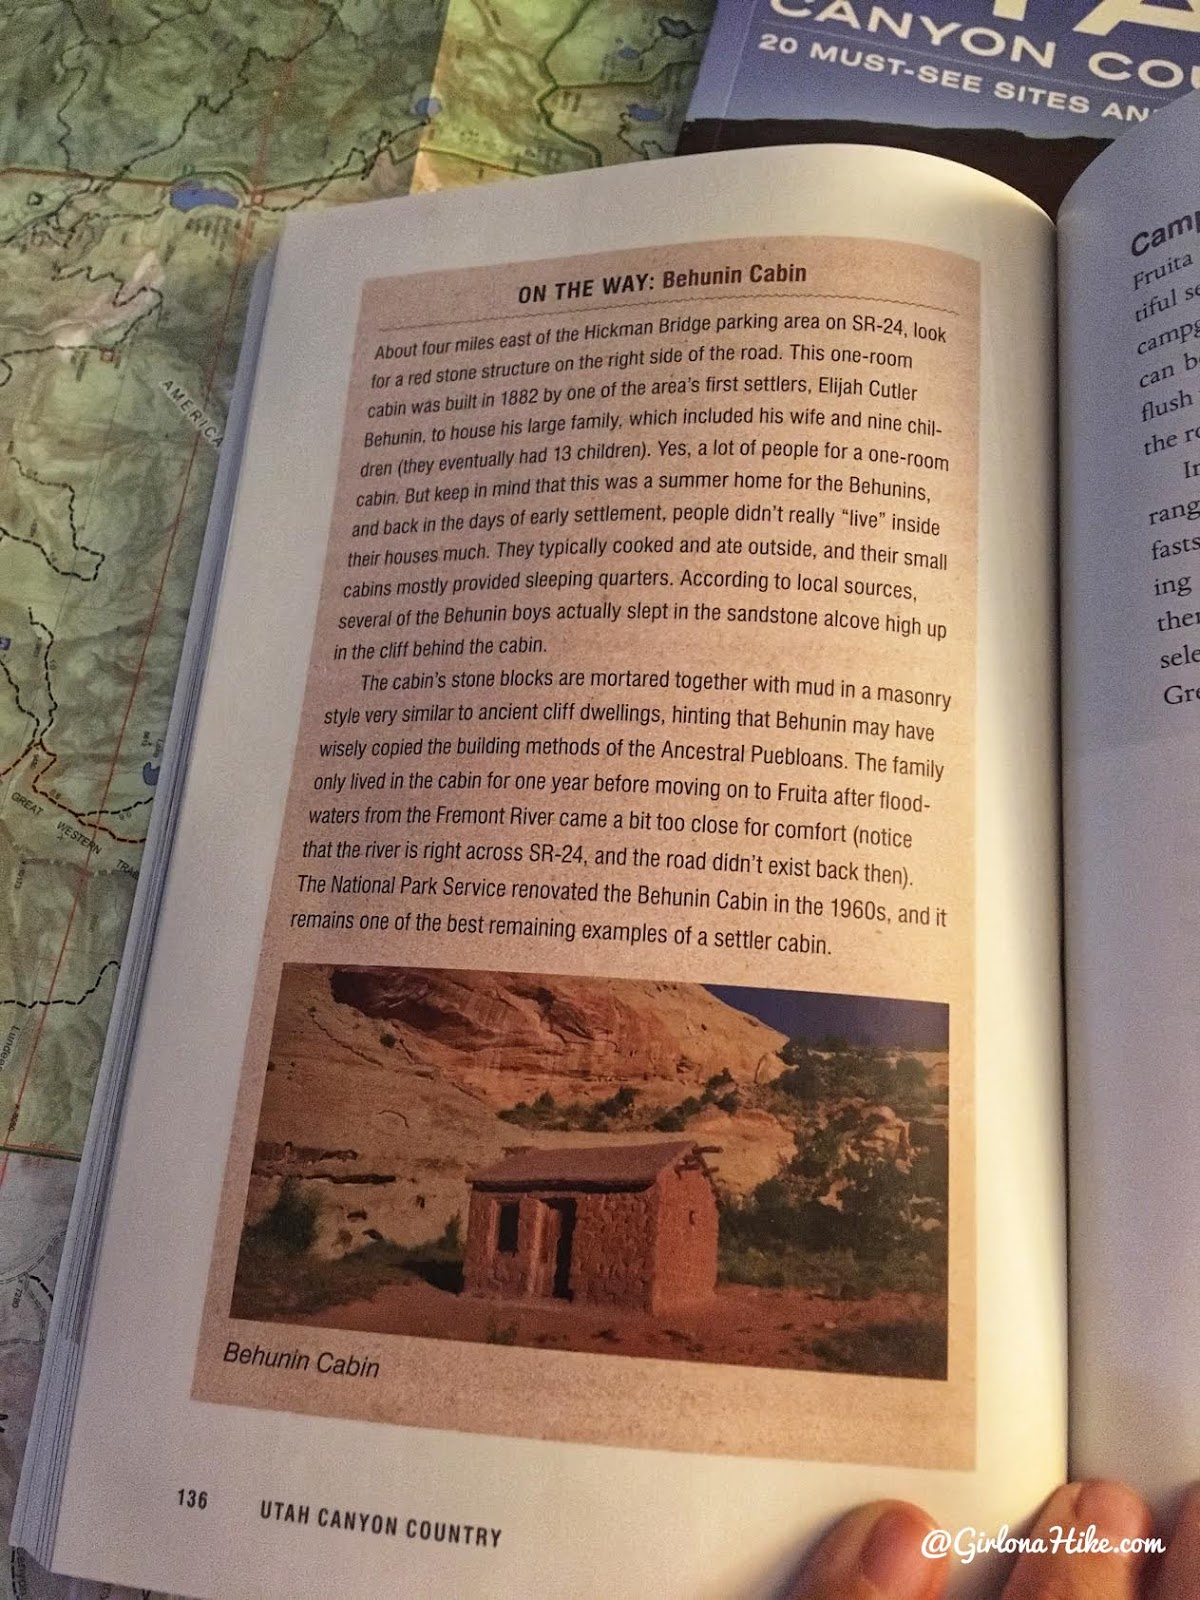 Book Review - Utah Canyon Country: 20 Must-see Sites and Short Hikes